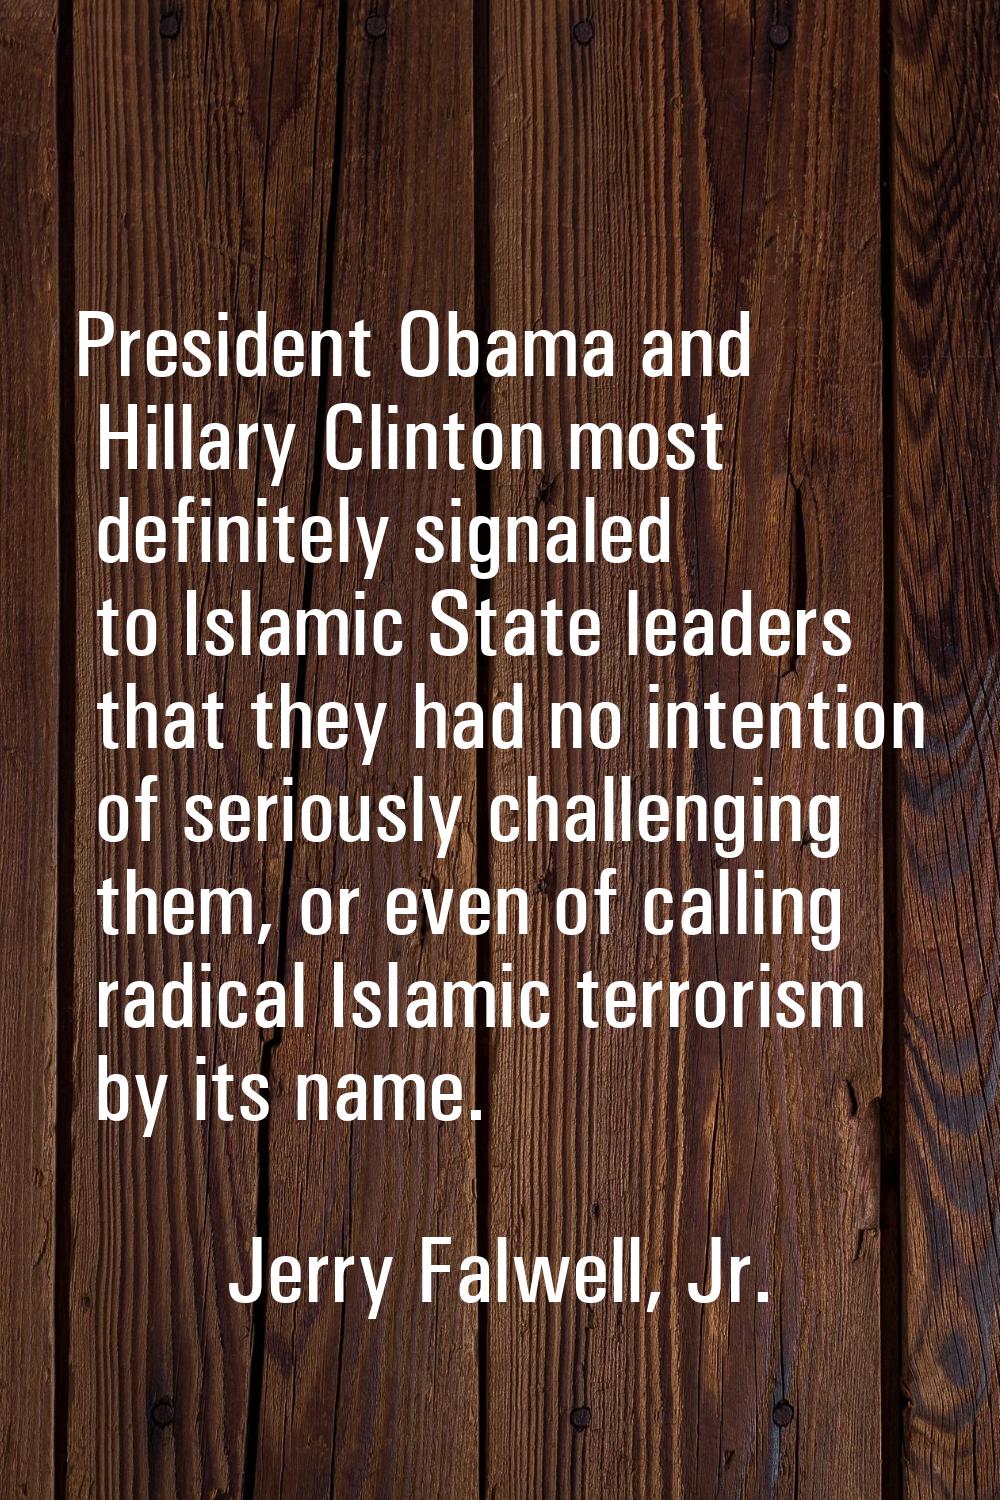 President Obama and Hillary Clinton most definitely signaled to Islamic State leaders that they had